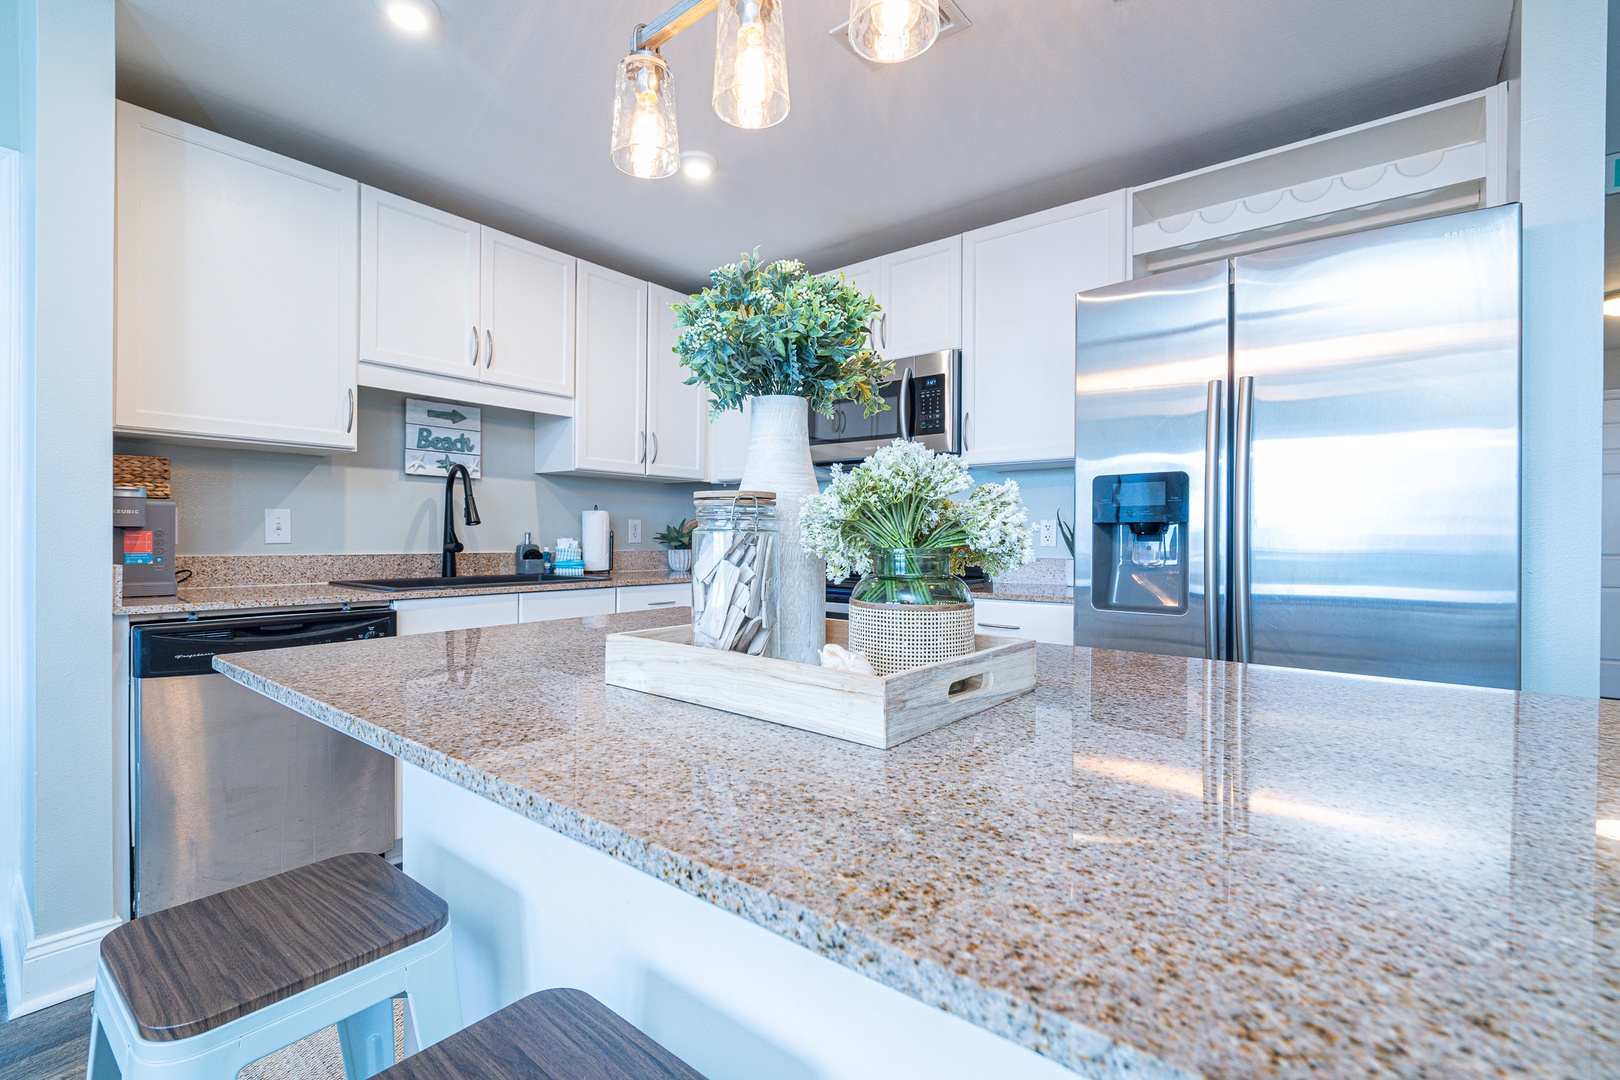 The airy, beachy kitchen offers ample space & every home comfort